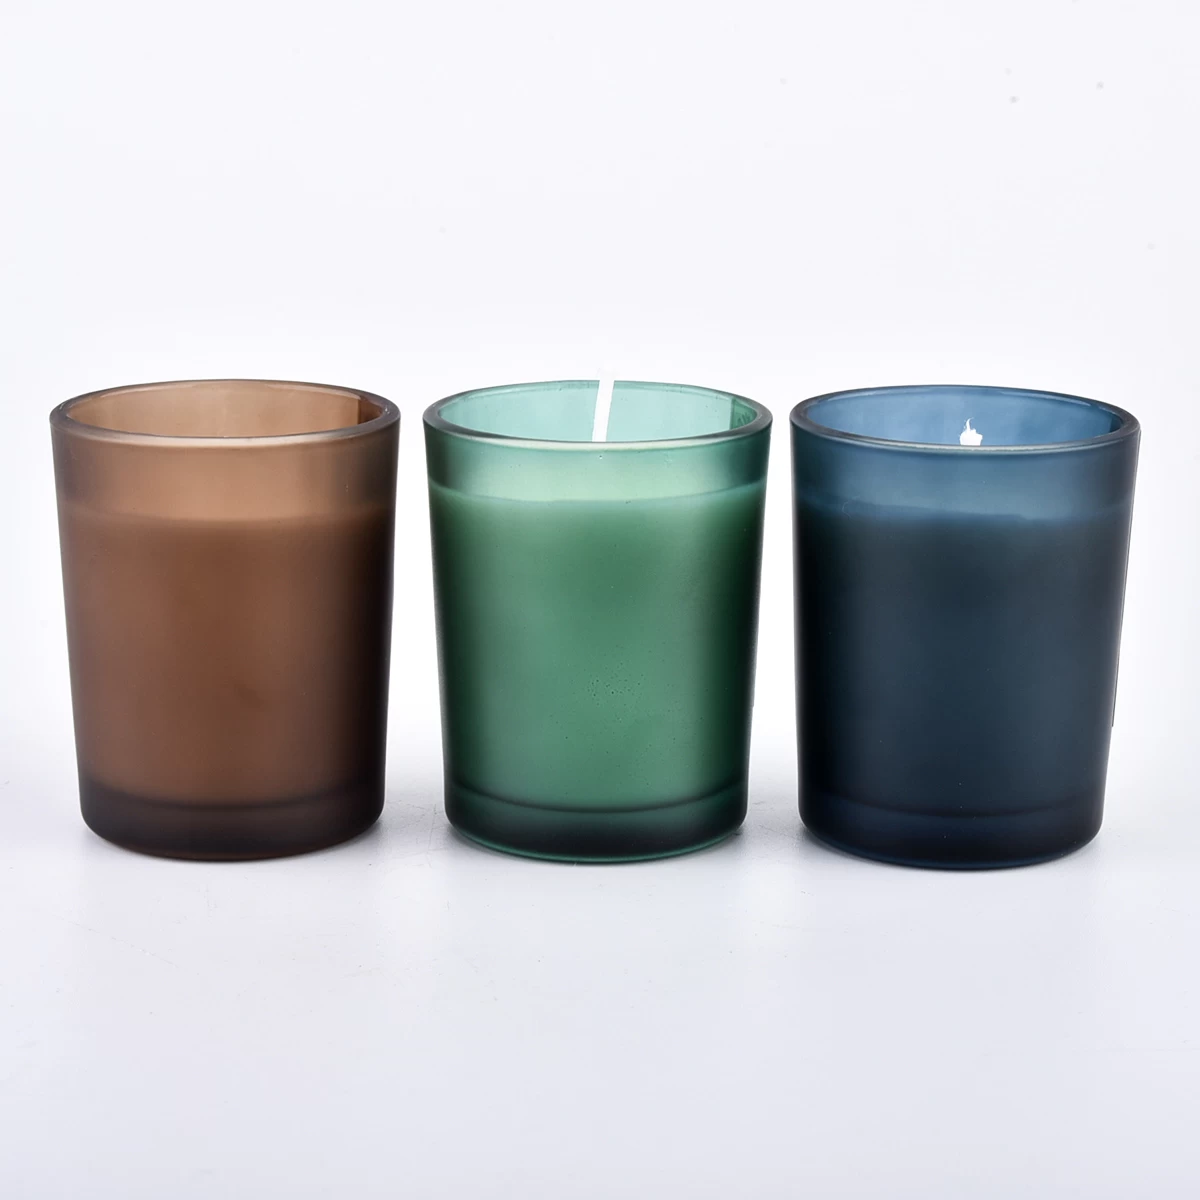 votive glass candle holders colored small vessels